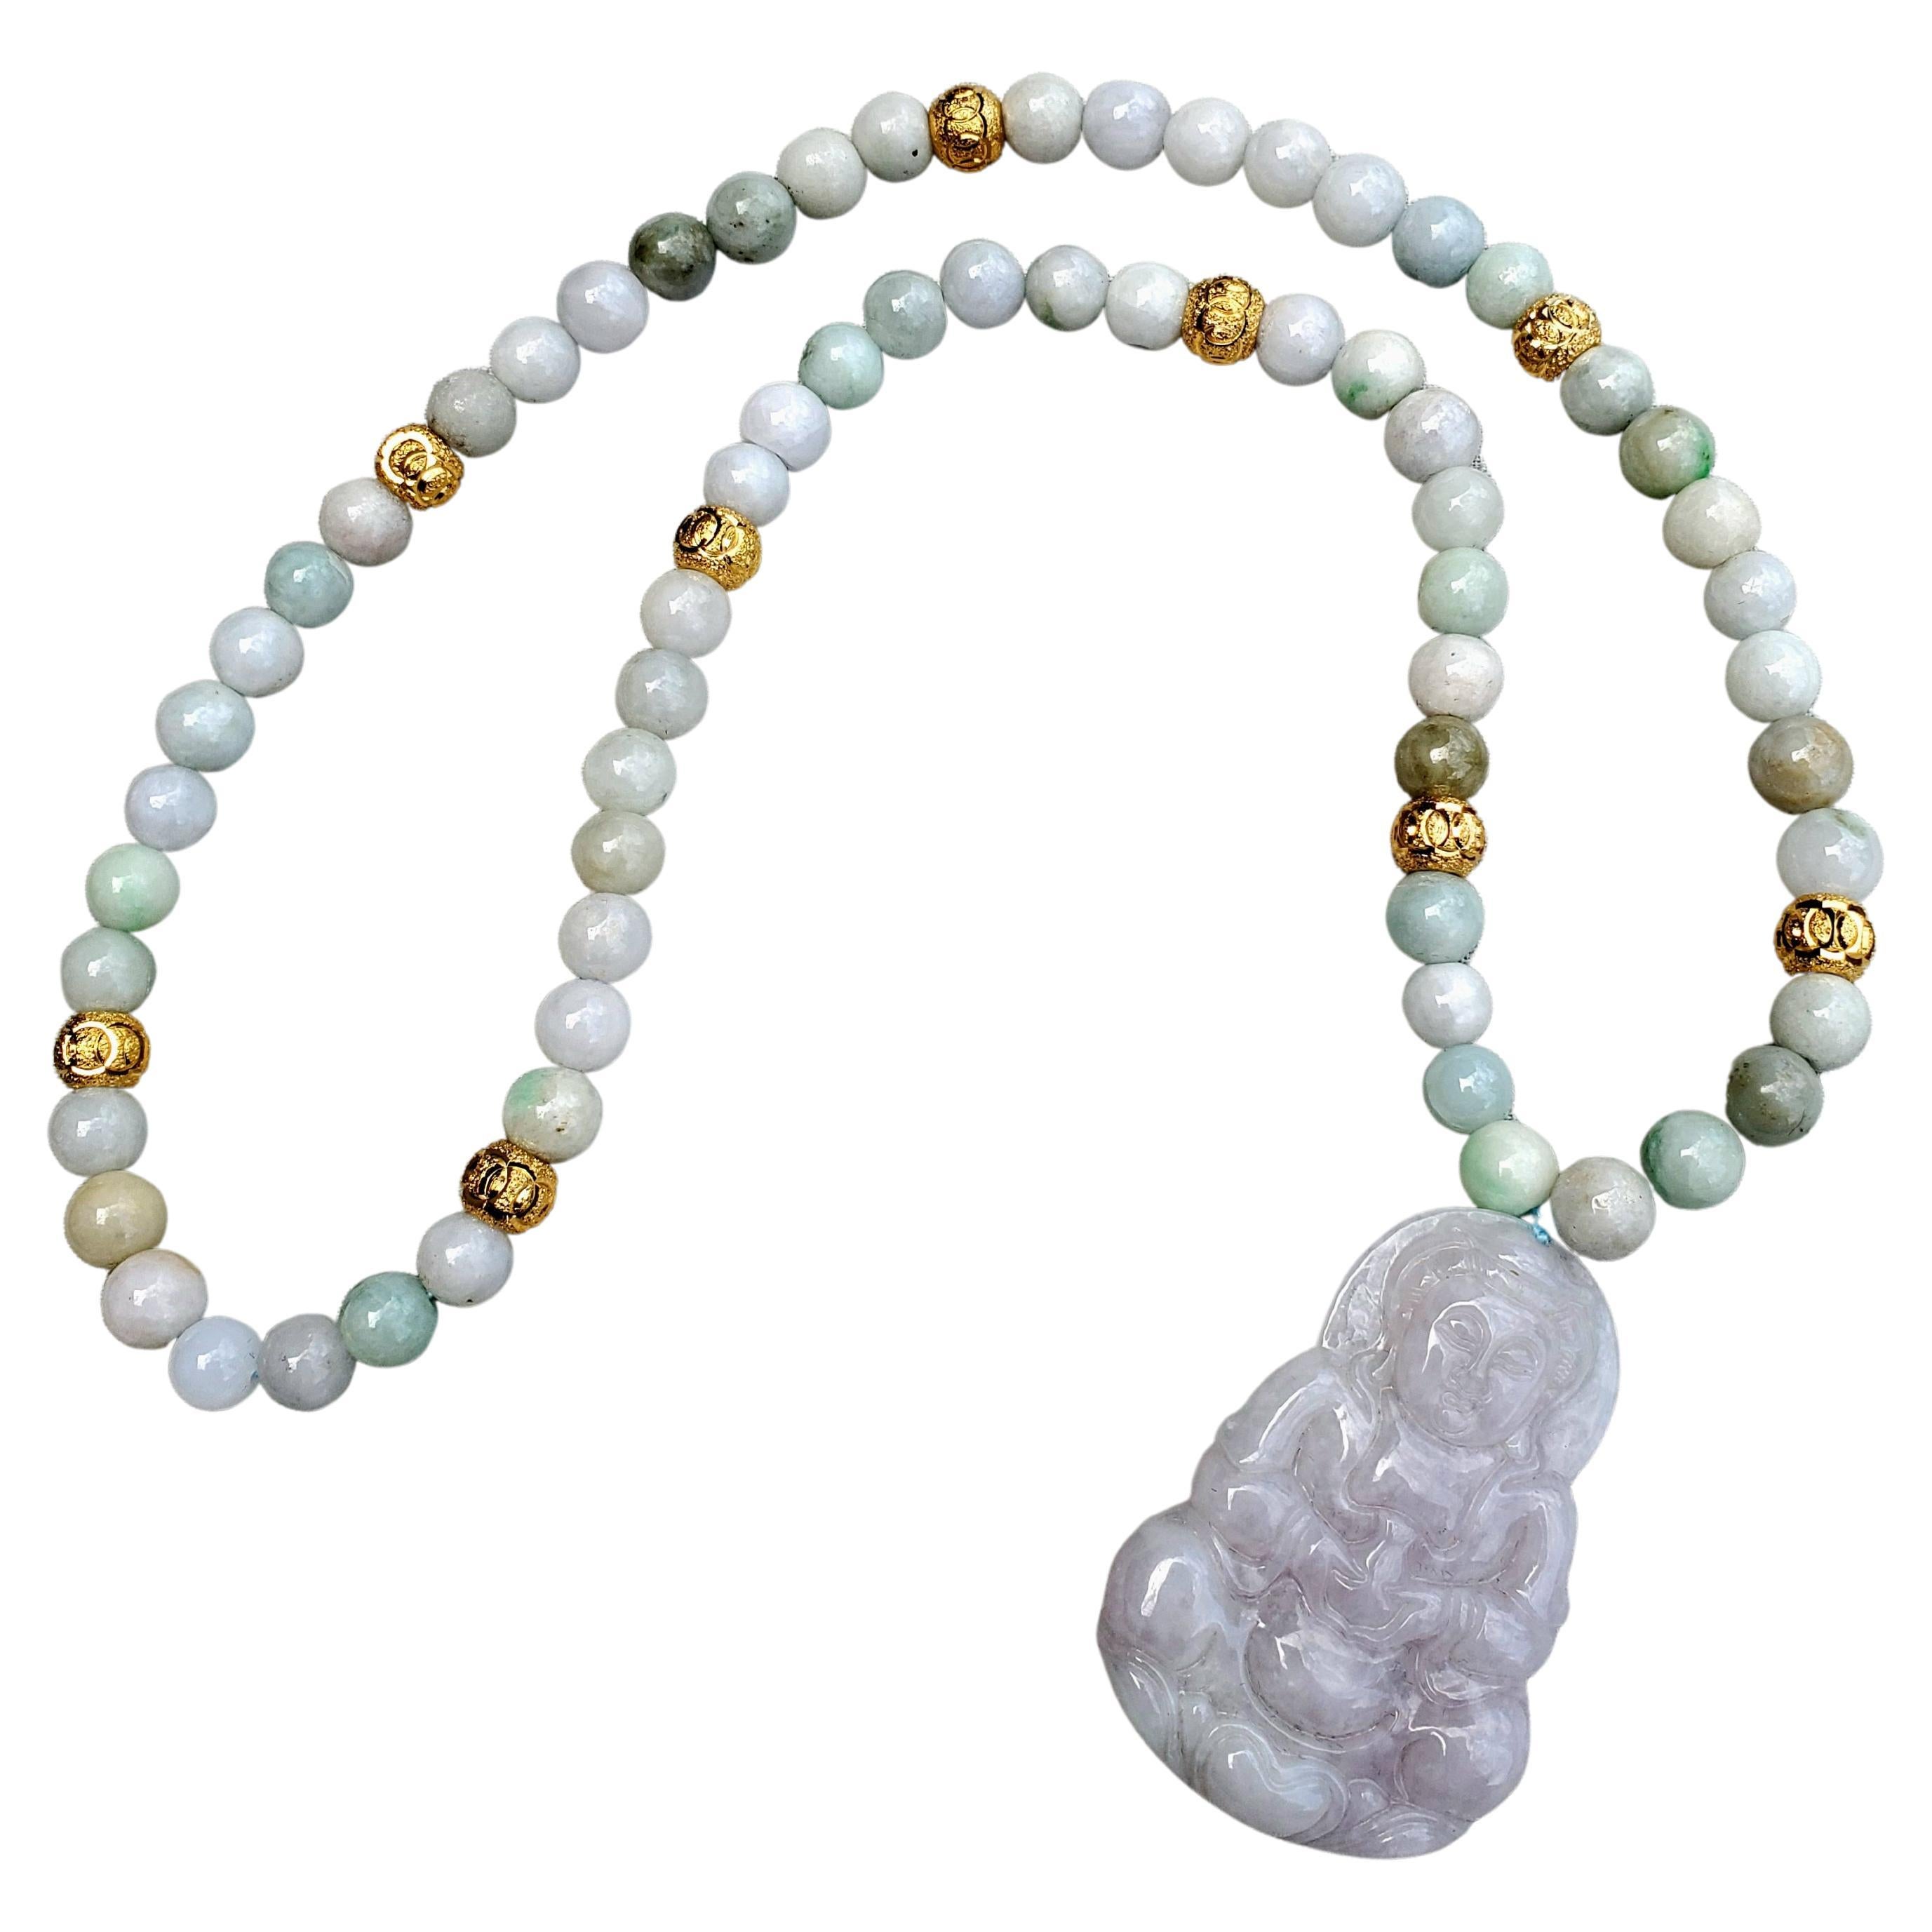 Vintage Natural Jadeite & Gold Beaded Necklace with Carved Pendant of Guanyin